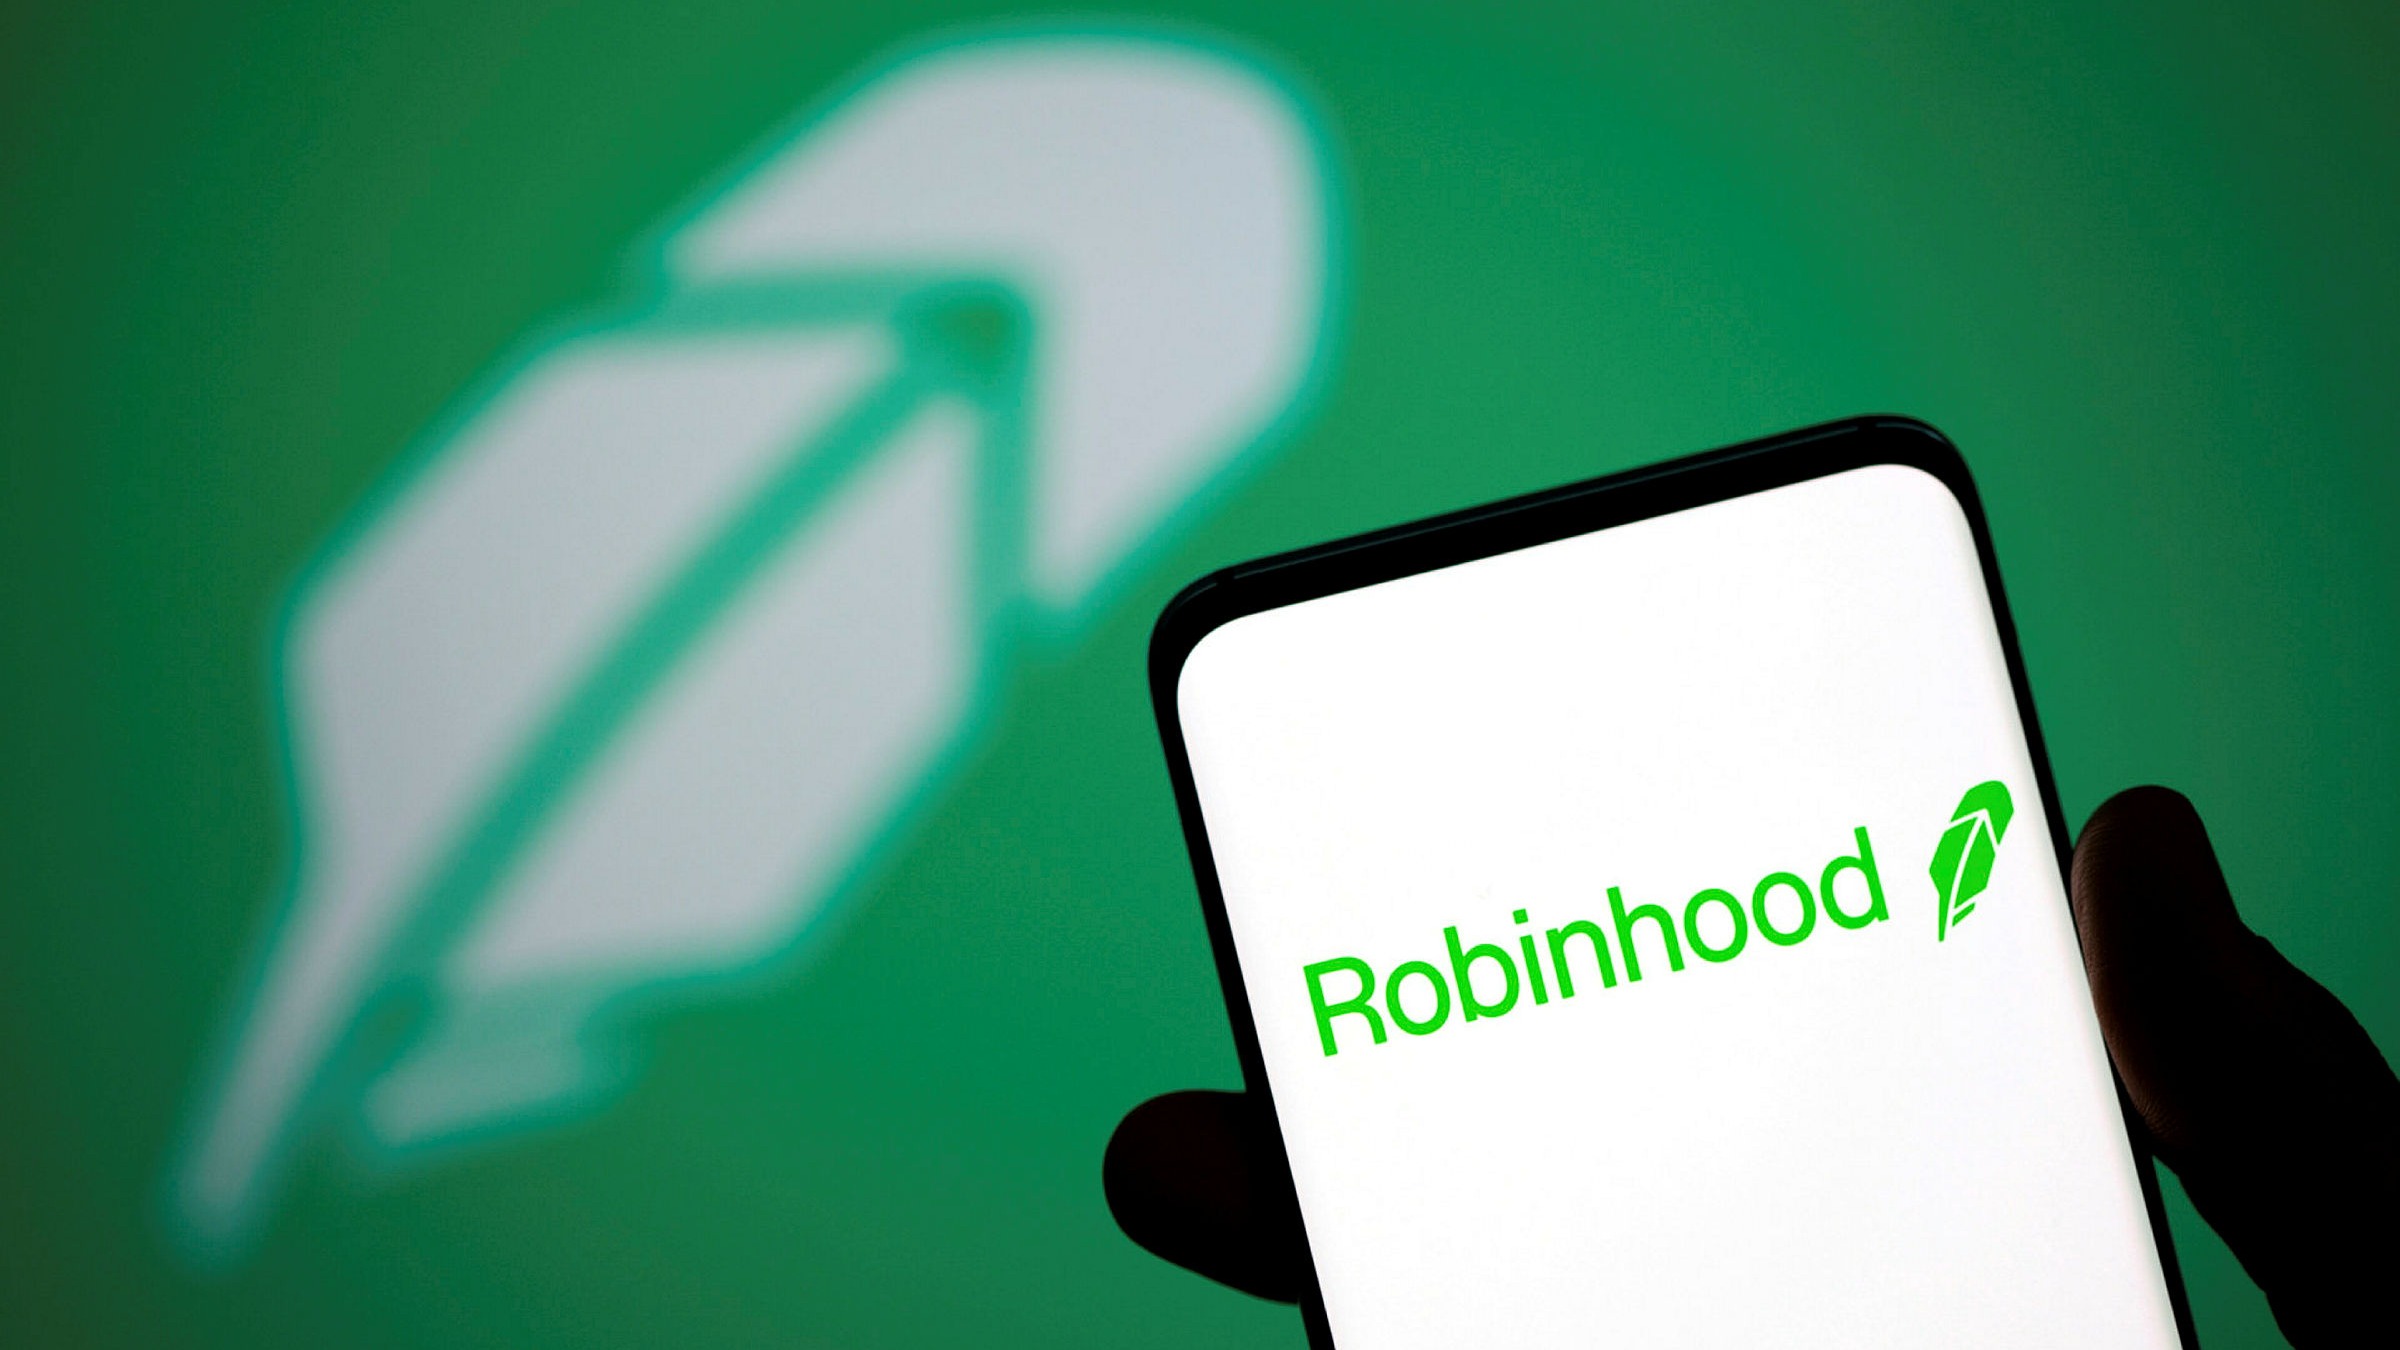 Robinhood ipo target price news for forex traders